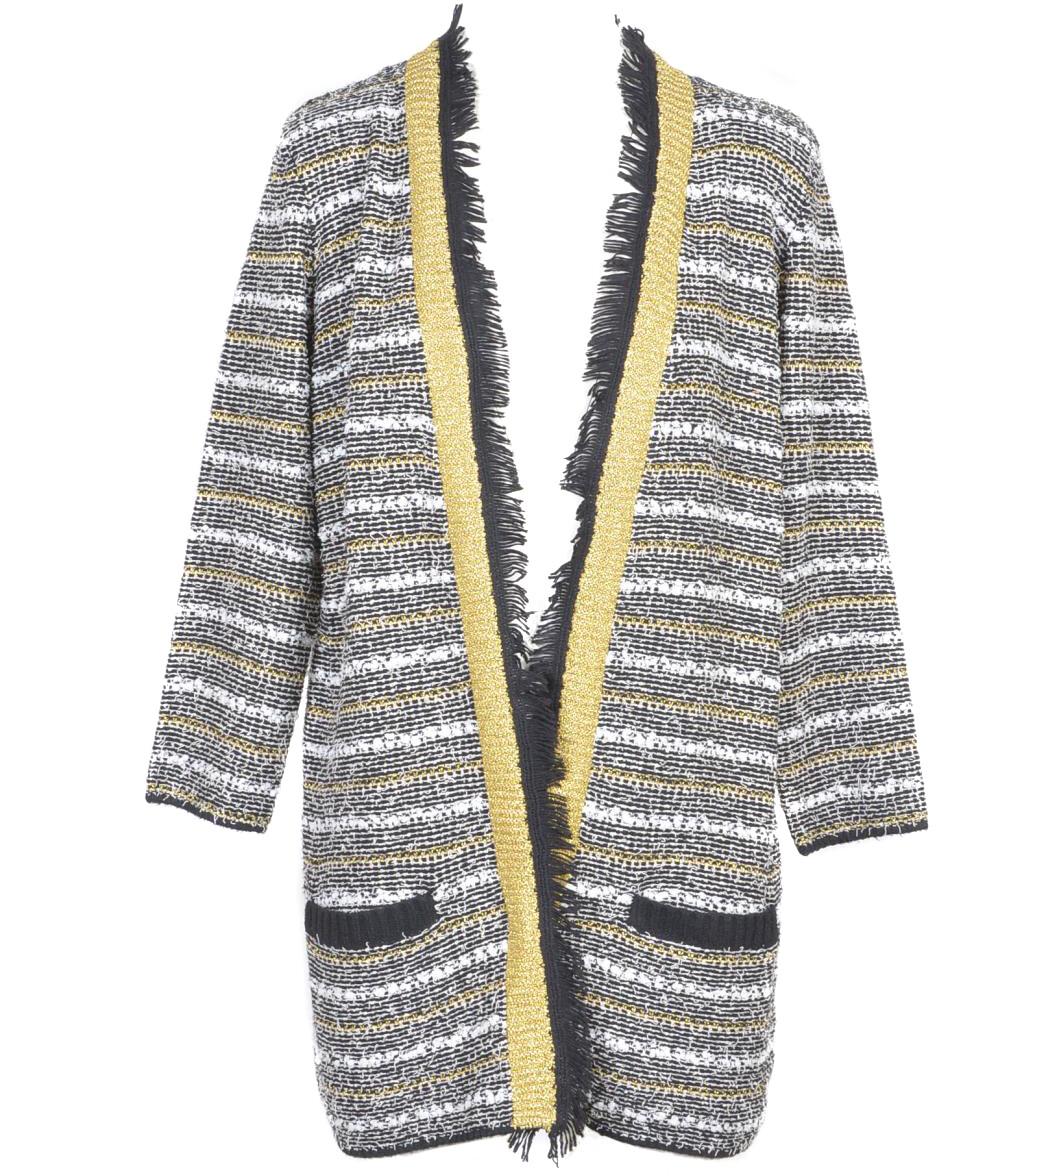 Vergissing criticus elf Patrizia Pepe White, Black and Gold Open Cardigan 38 at FORZIERI